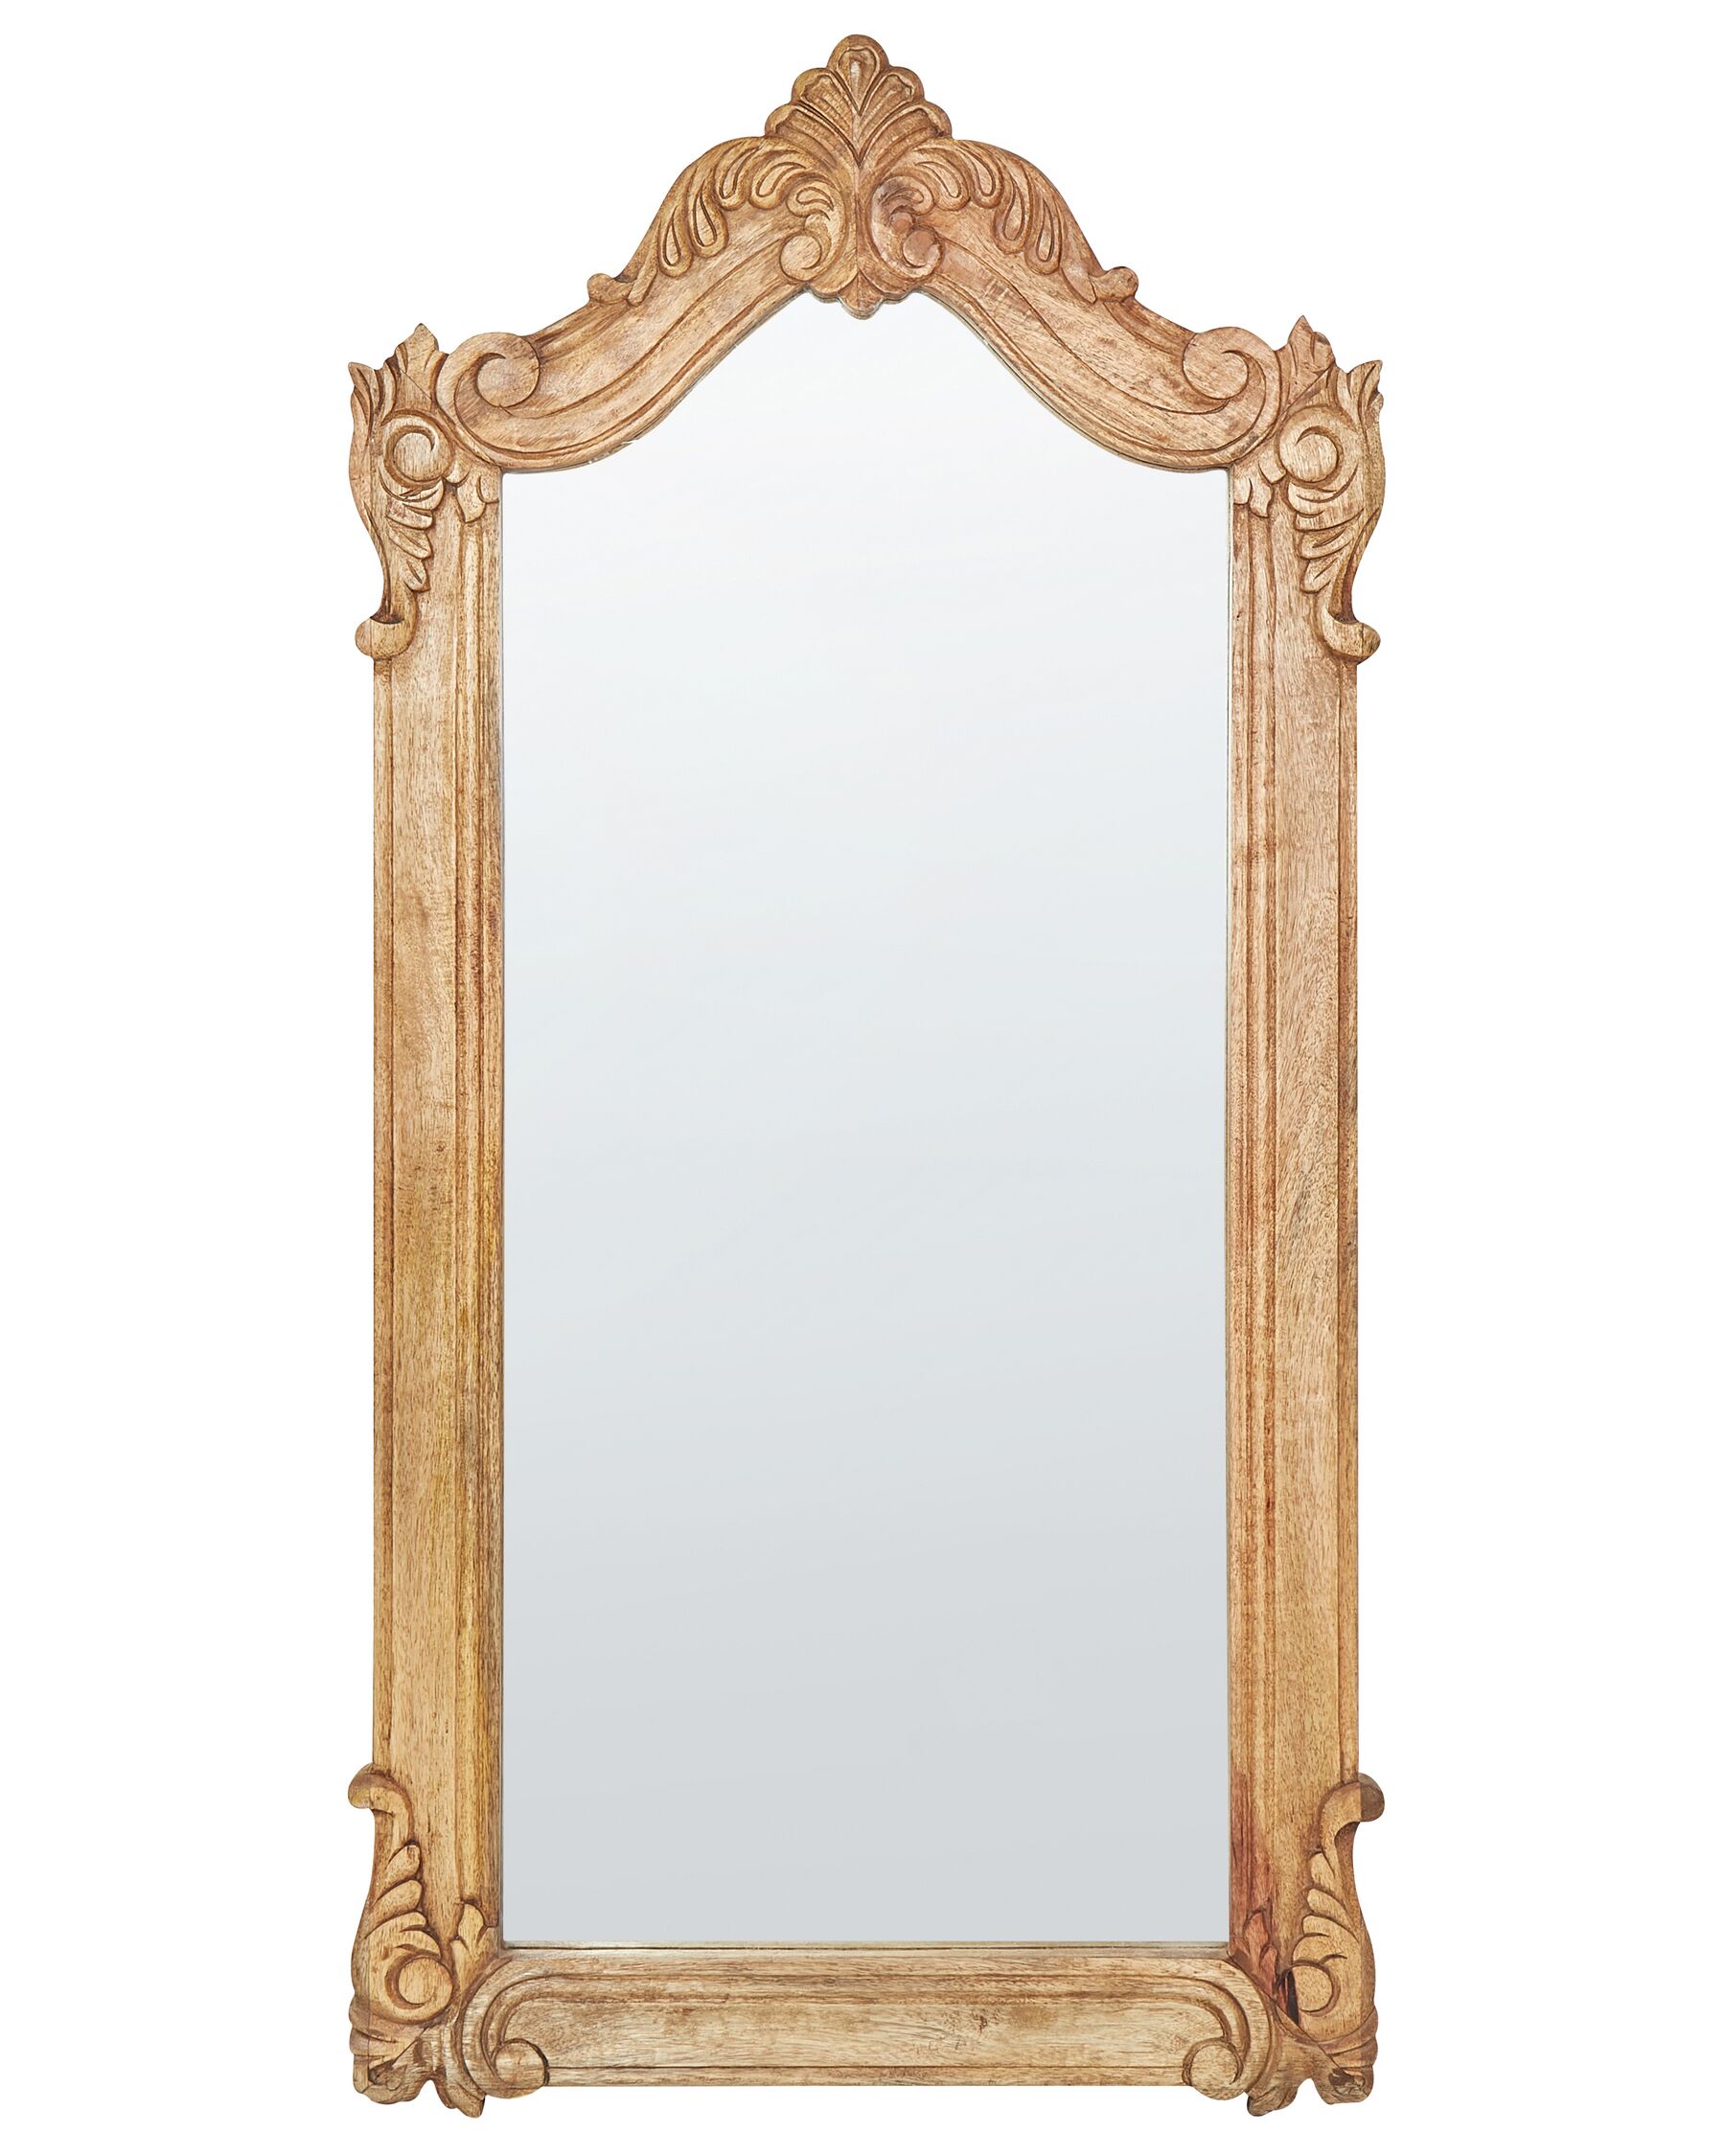 Wooden Wall Mirror 62 x 123 cm Light MABLY_899896